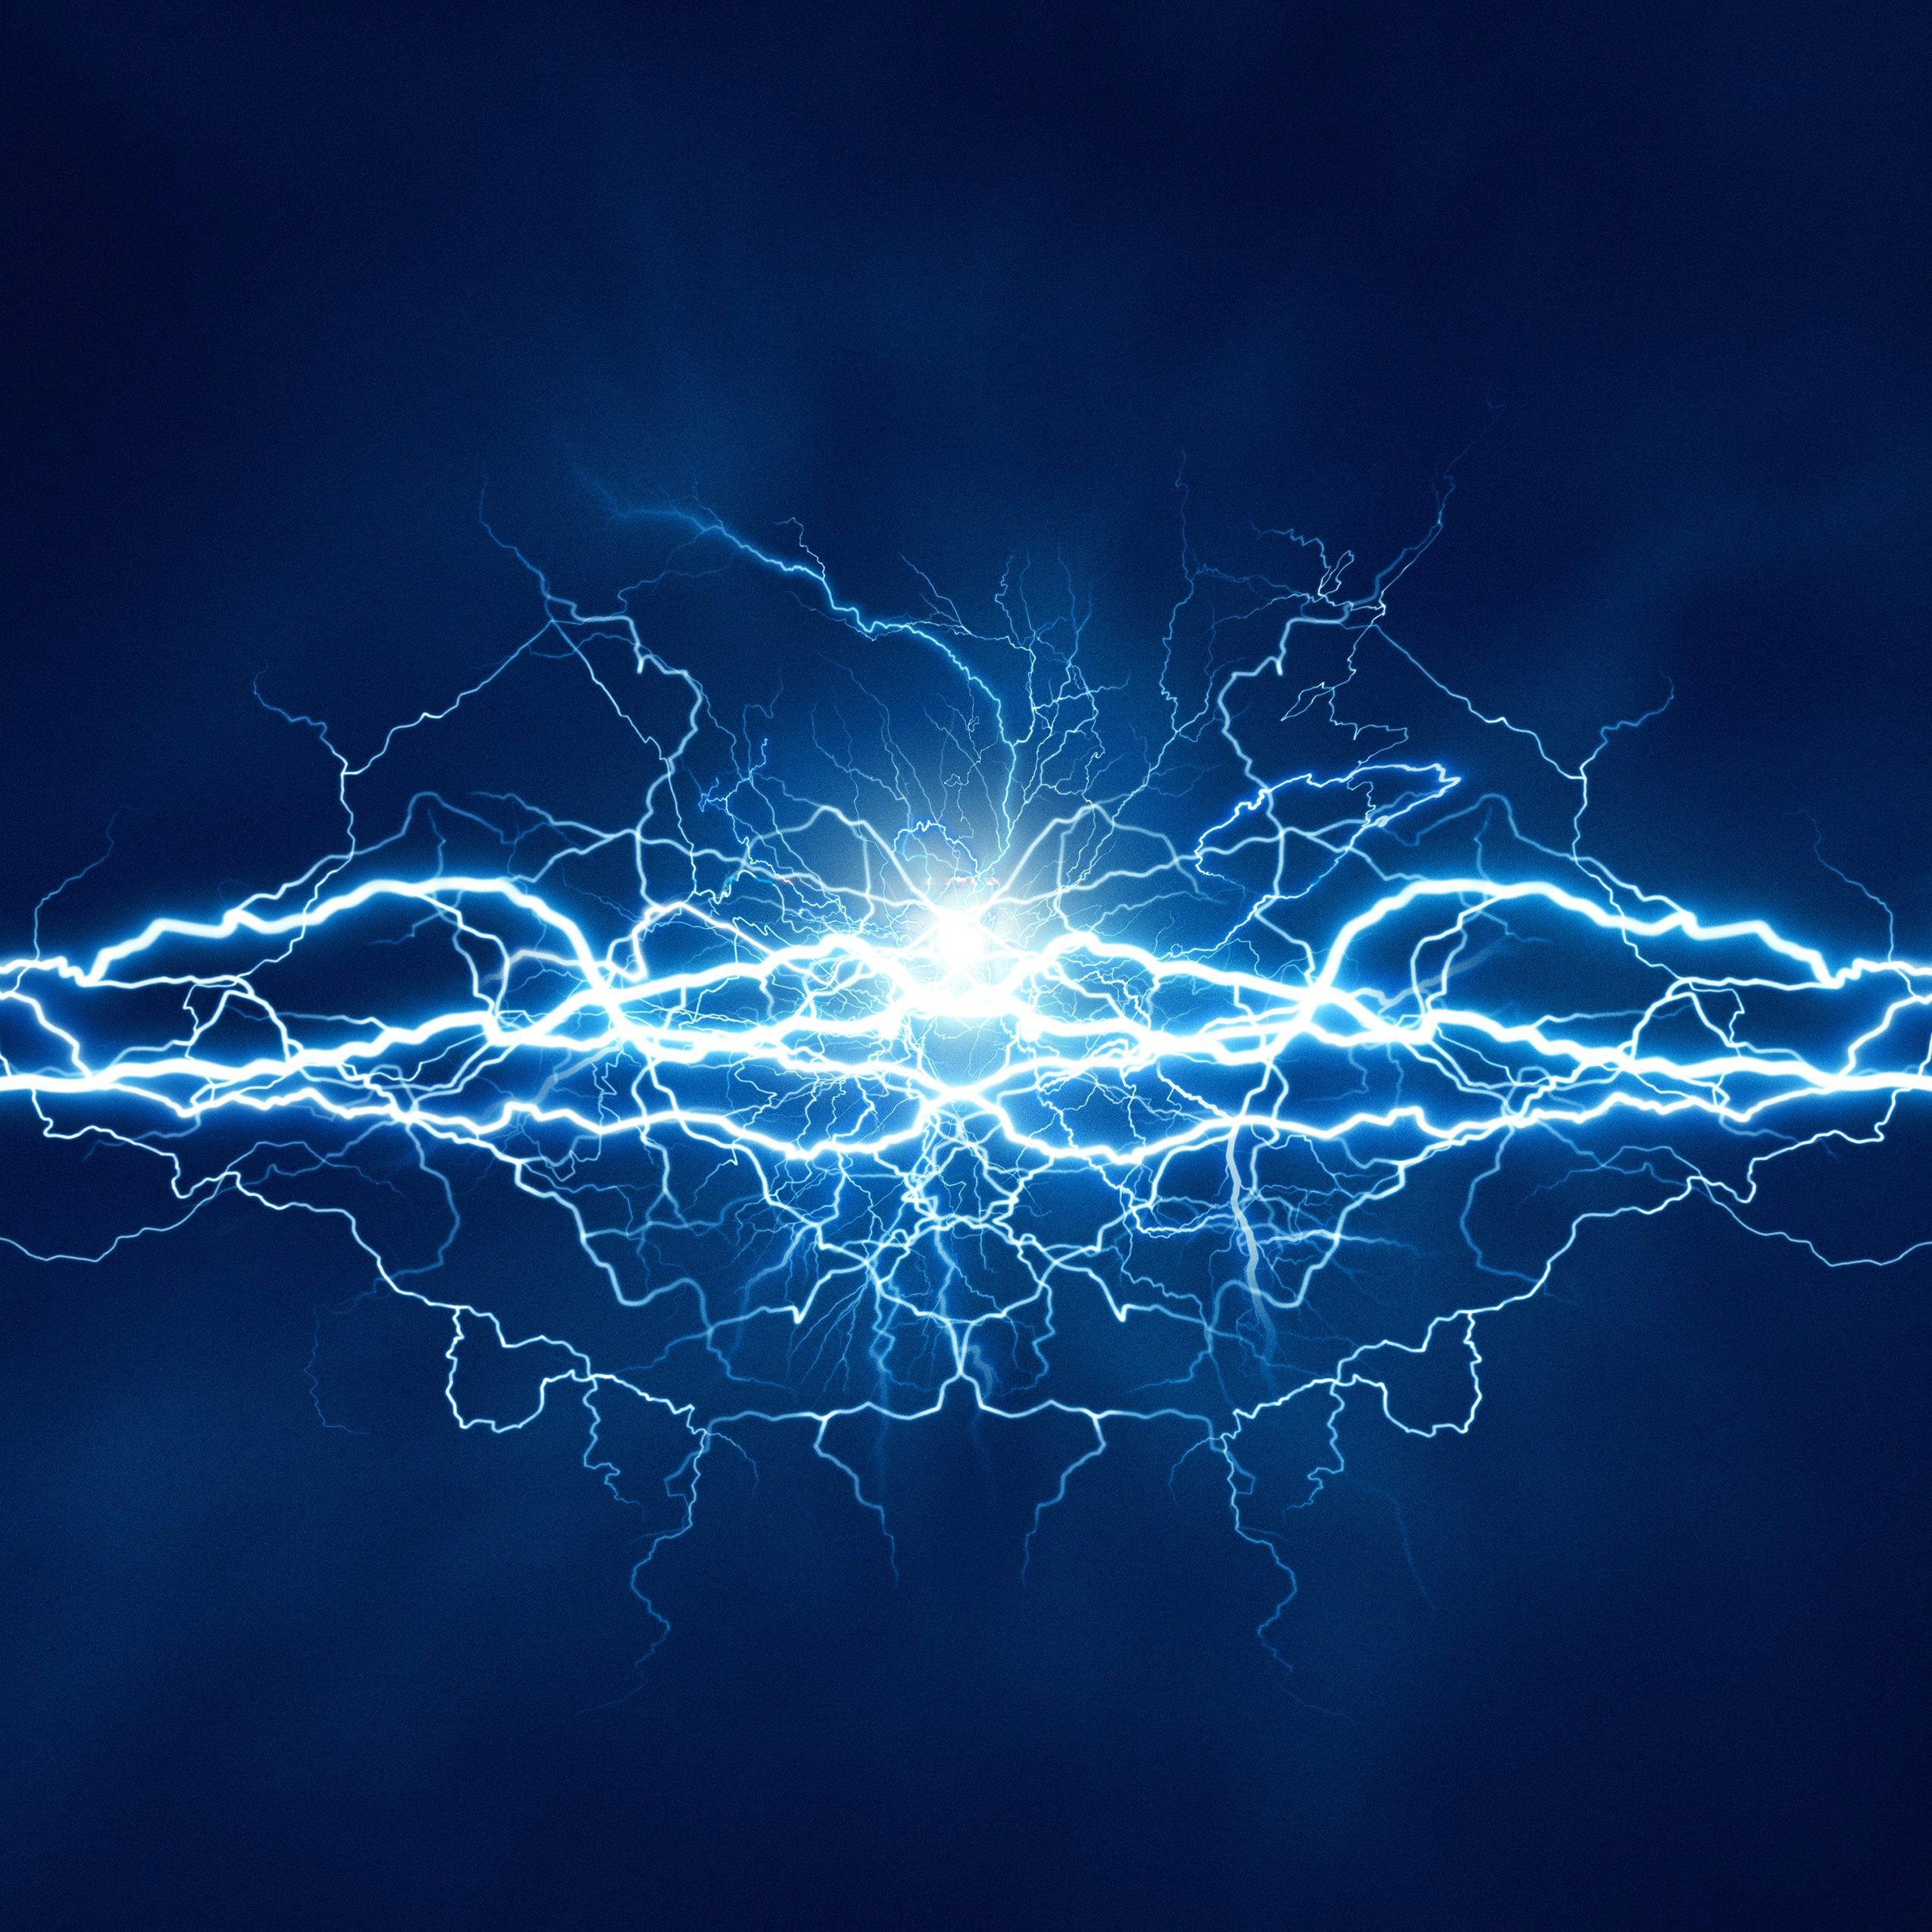 Electricity Wallpaper, HD Electricity Background on WallpaperBat